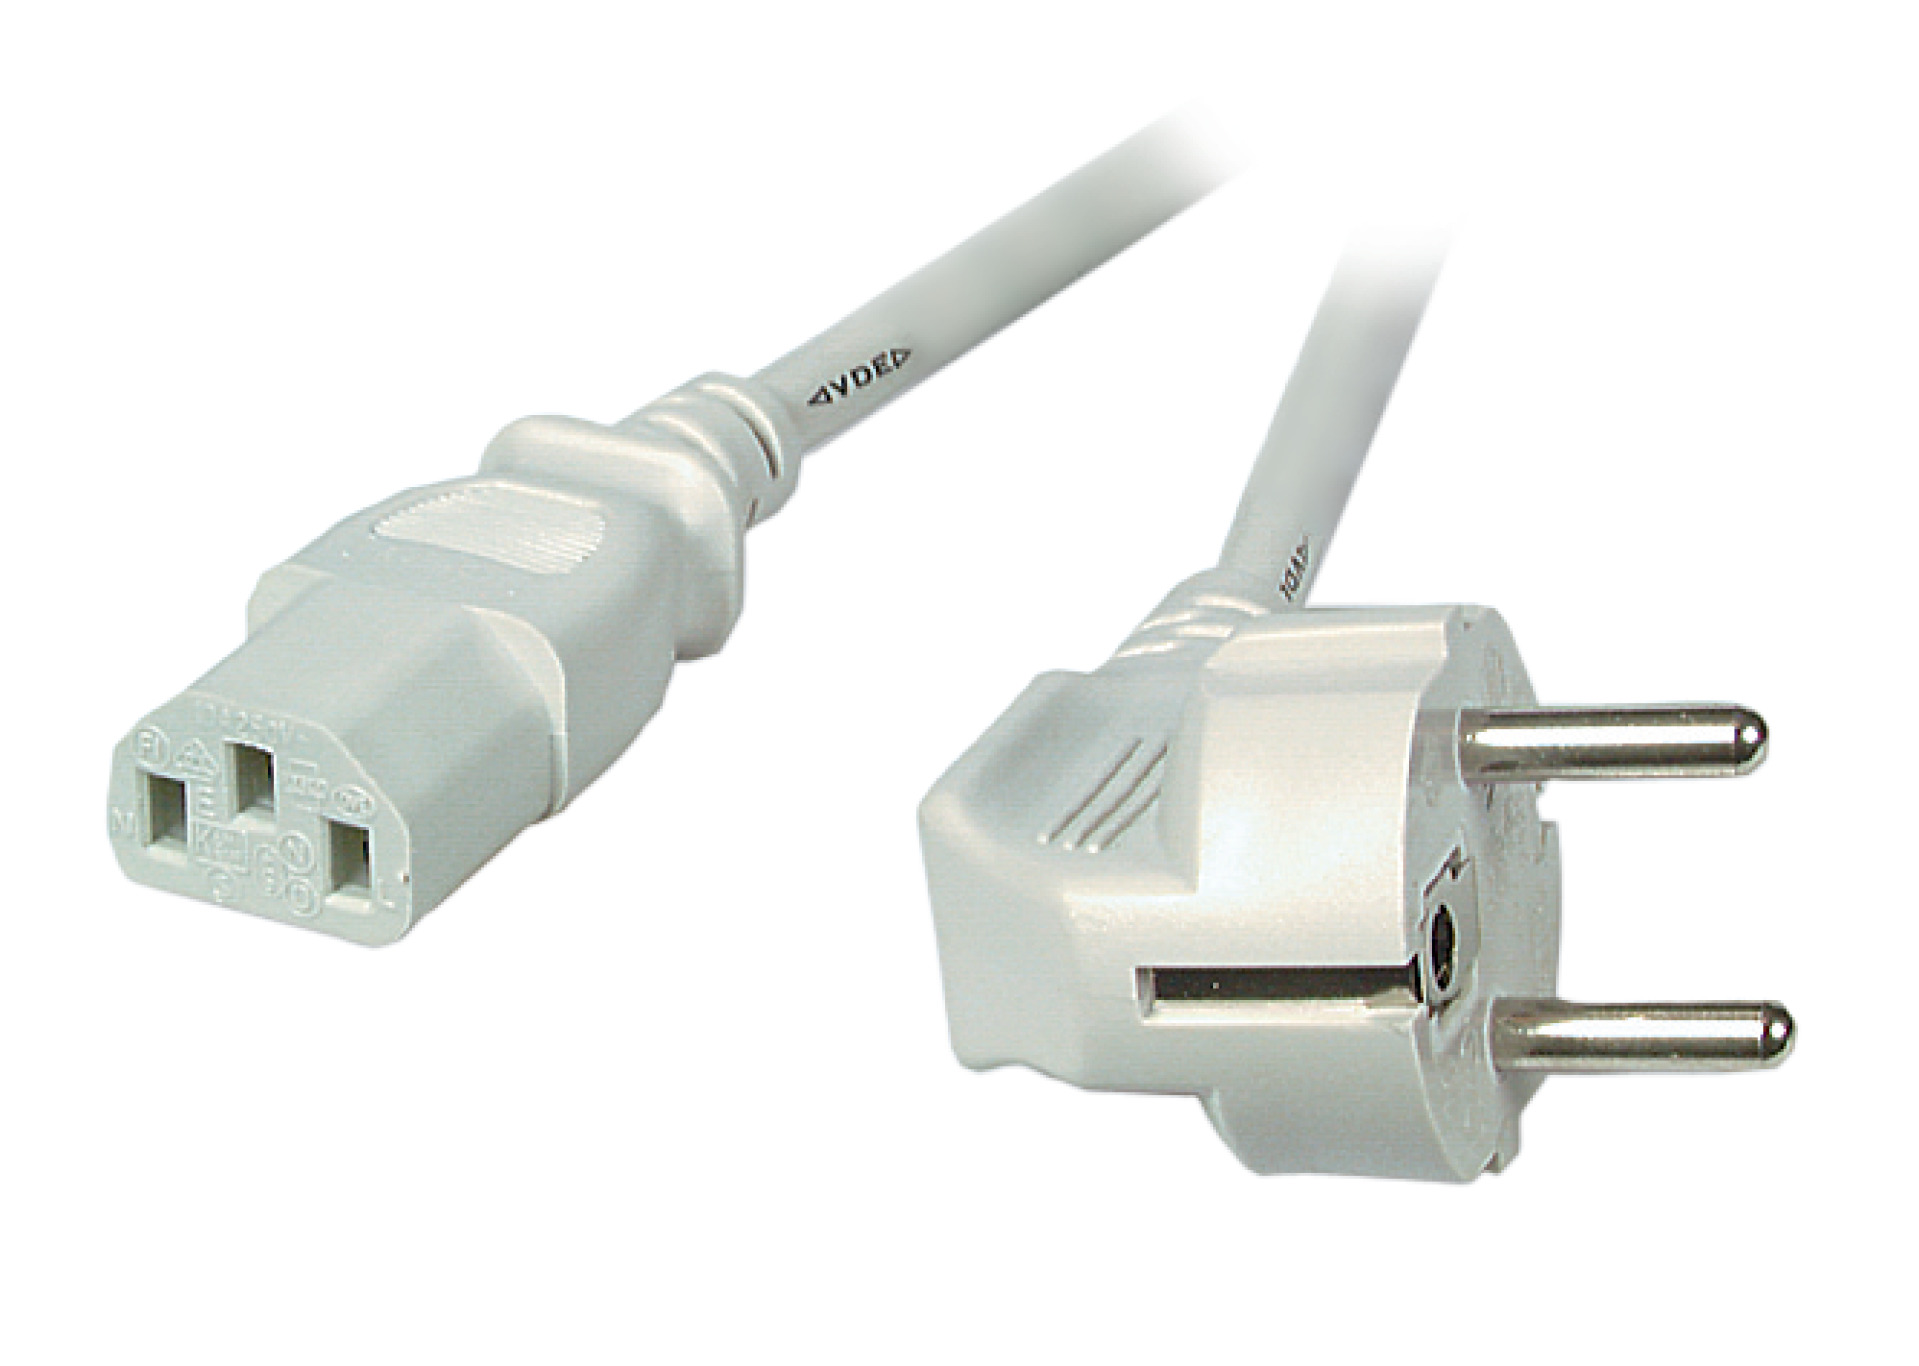 Power Cable CEE7/7 90° - C13 180°, Grey, 3 m, 3 x 1.00 mm²